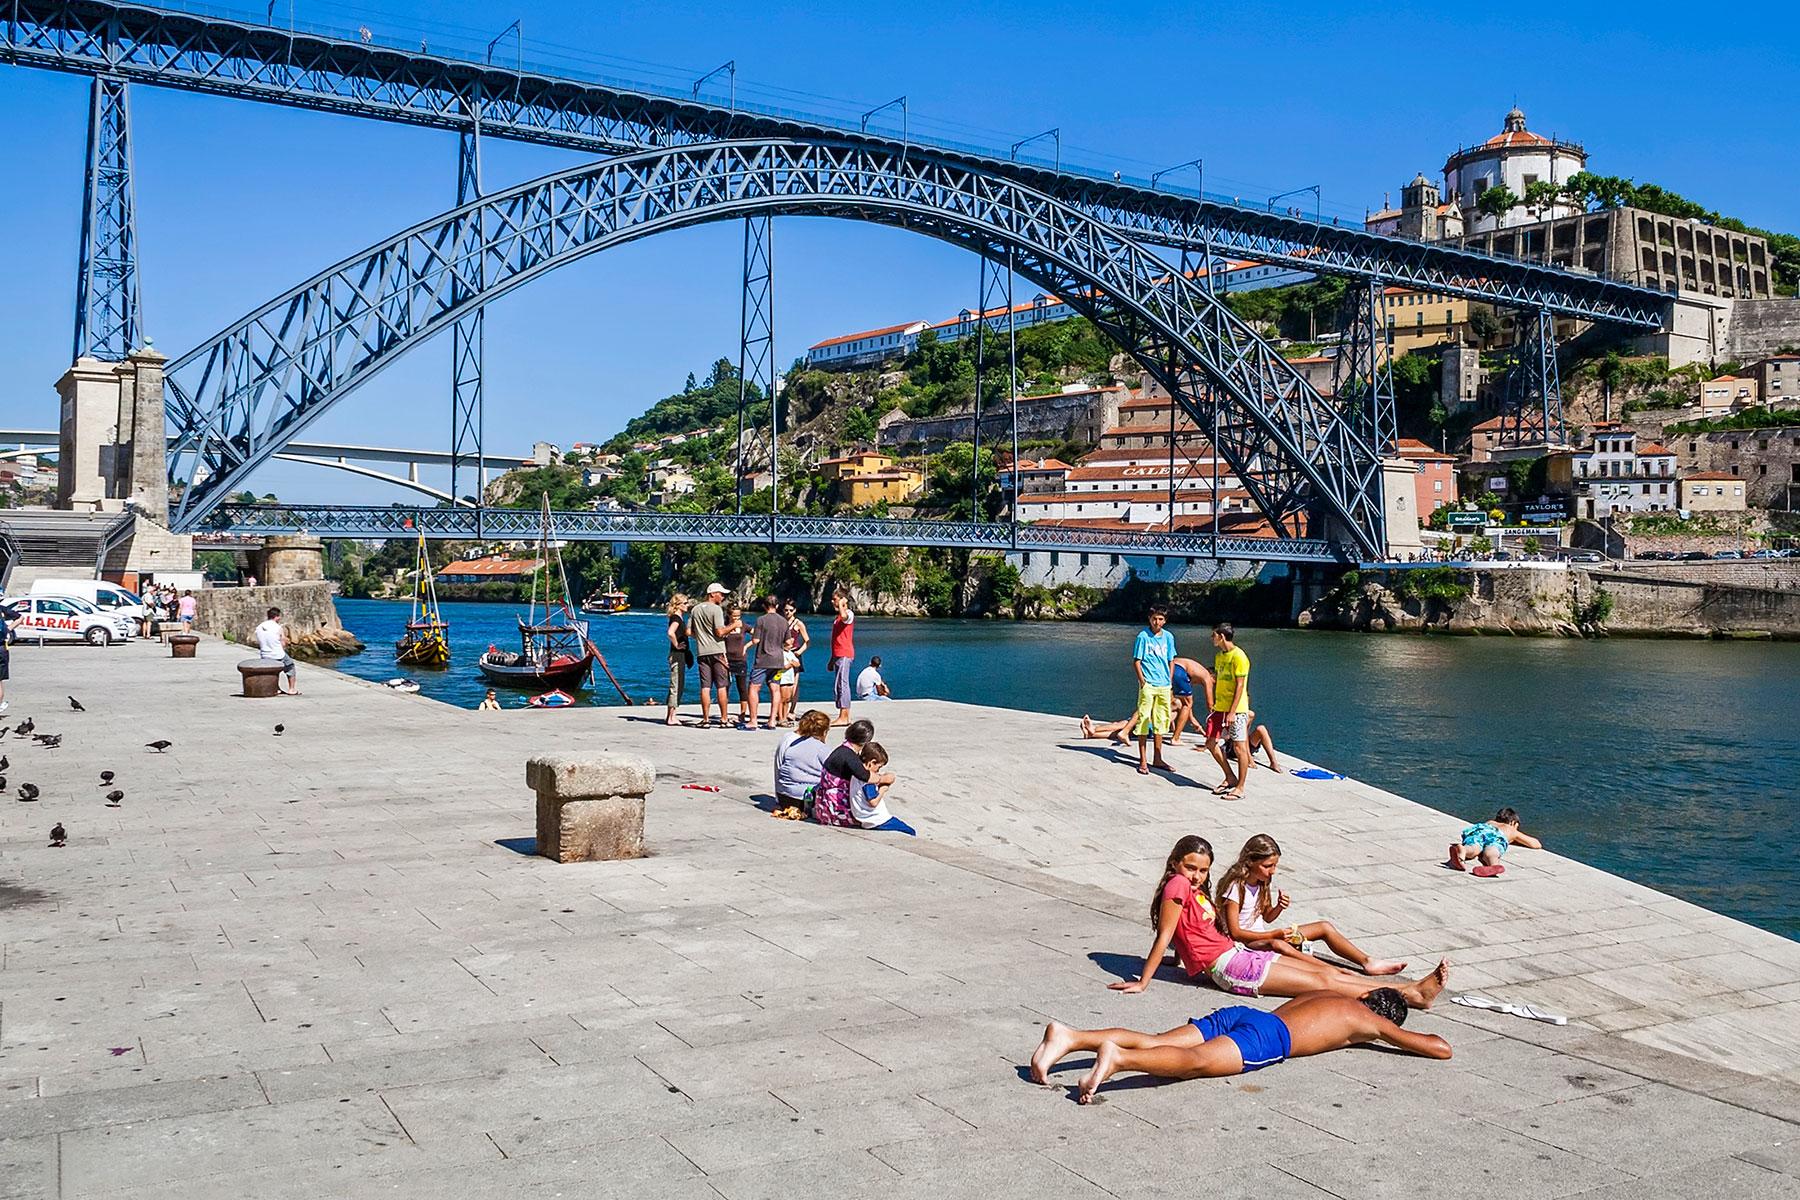 10 Things To Do In Porto (Besides Drink Port) – Fodors Travel Guide